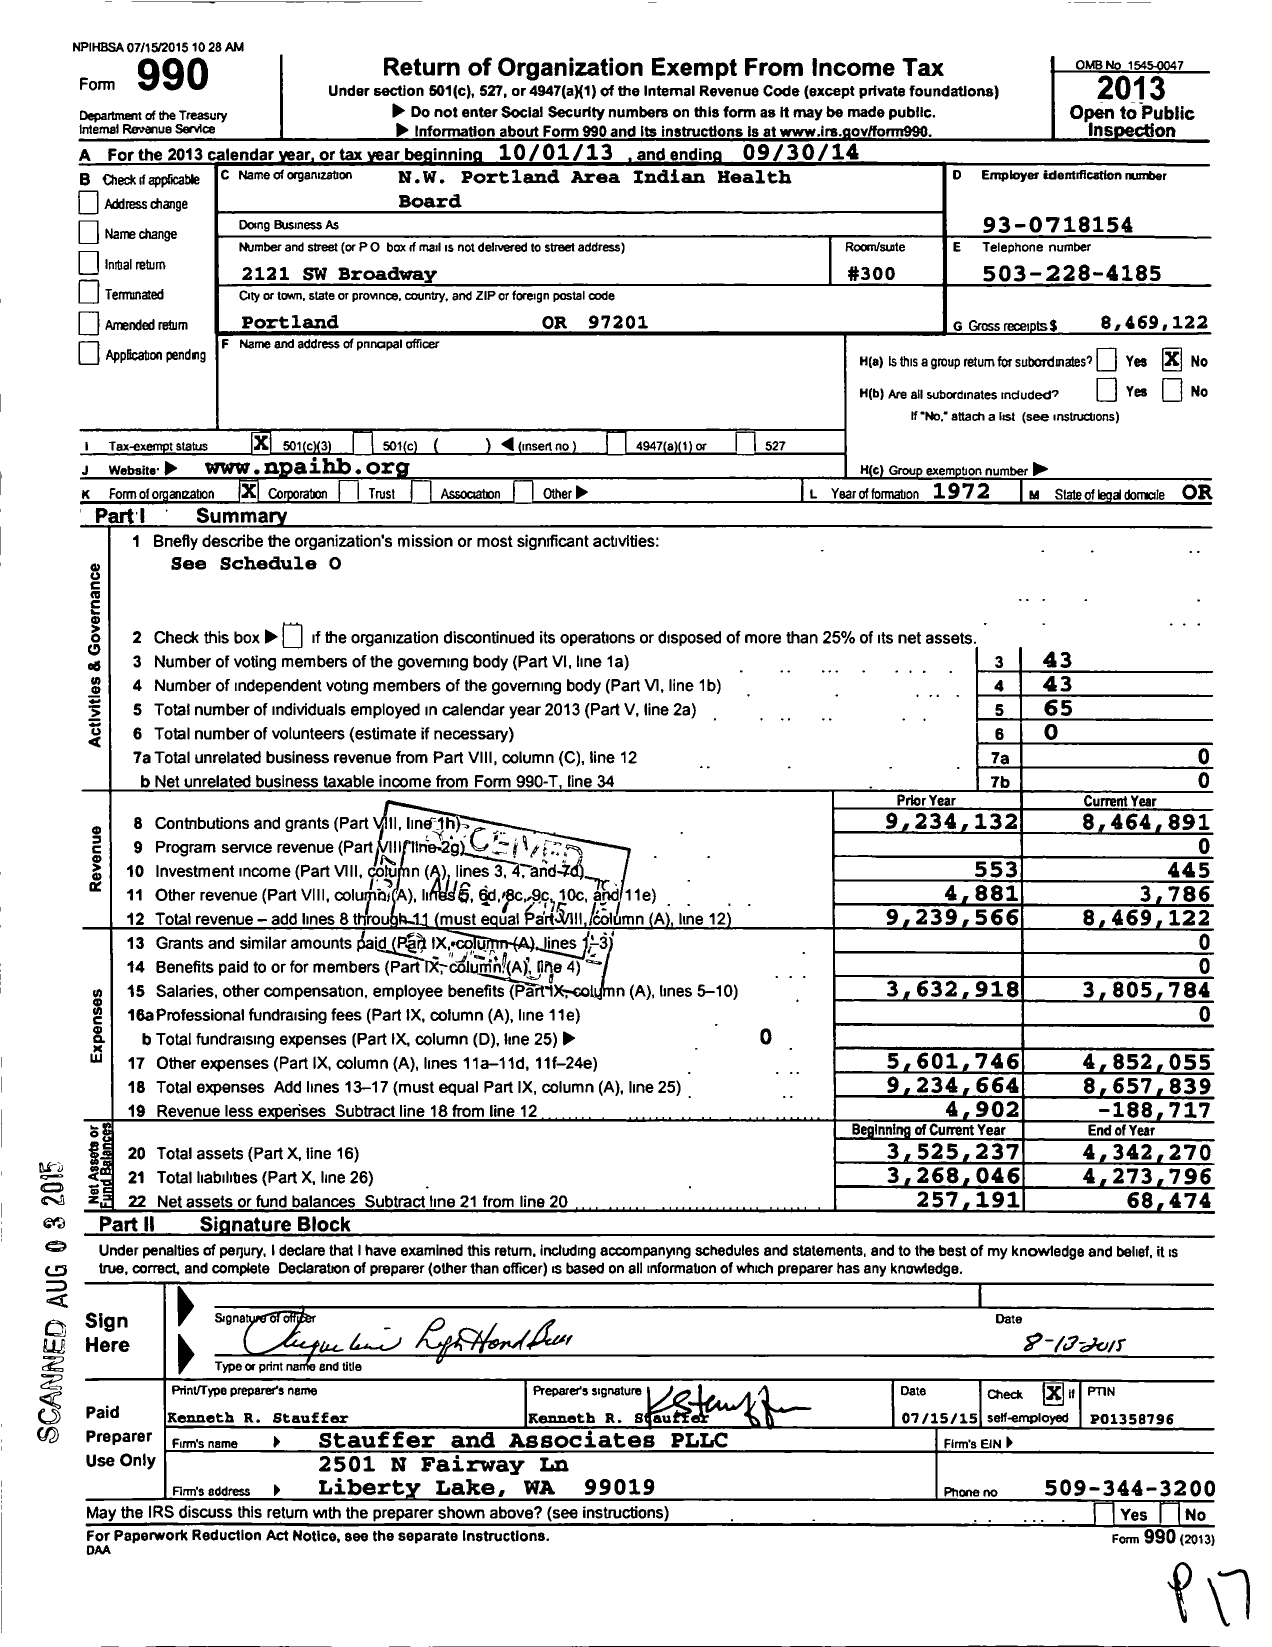 Image of first page of 2013 Form 990 for Northwest Portland Area Indian Health Board (NPAIHB)